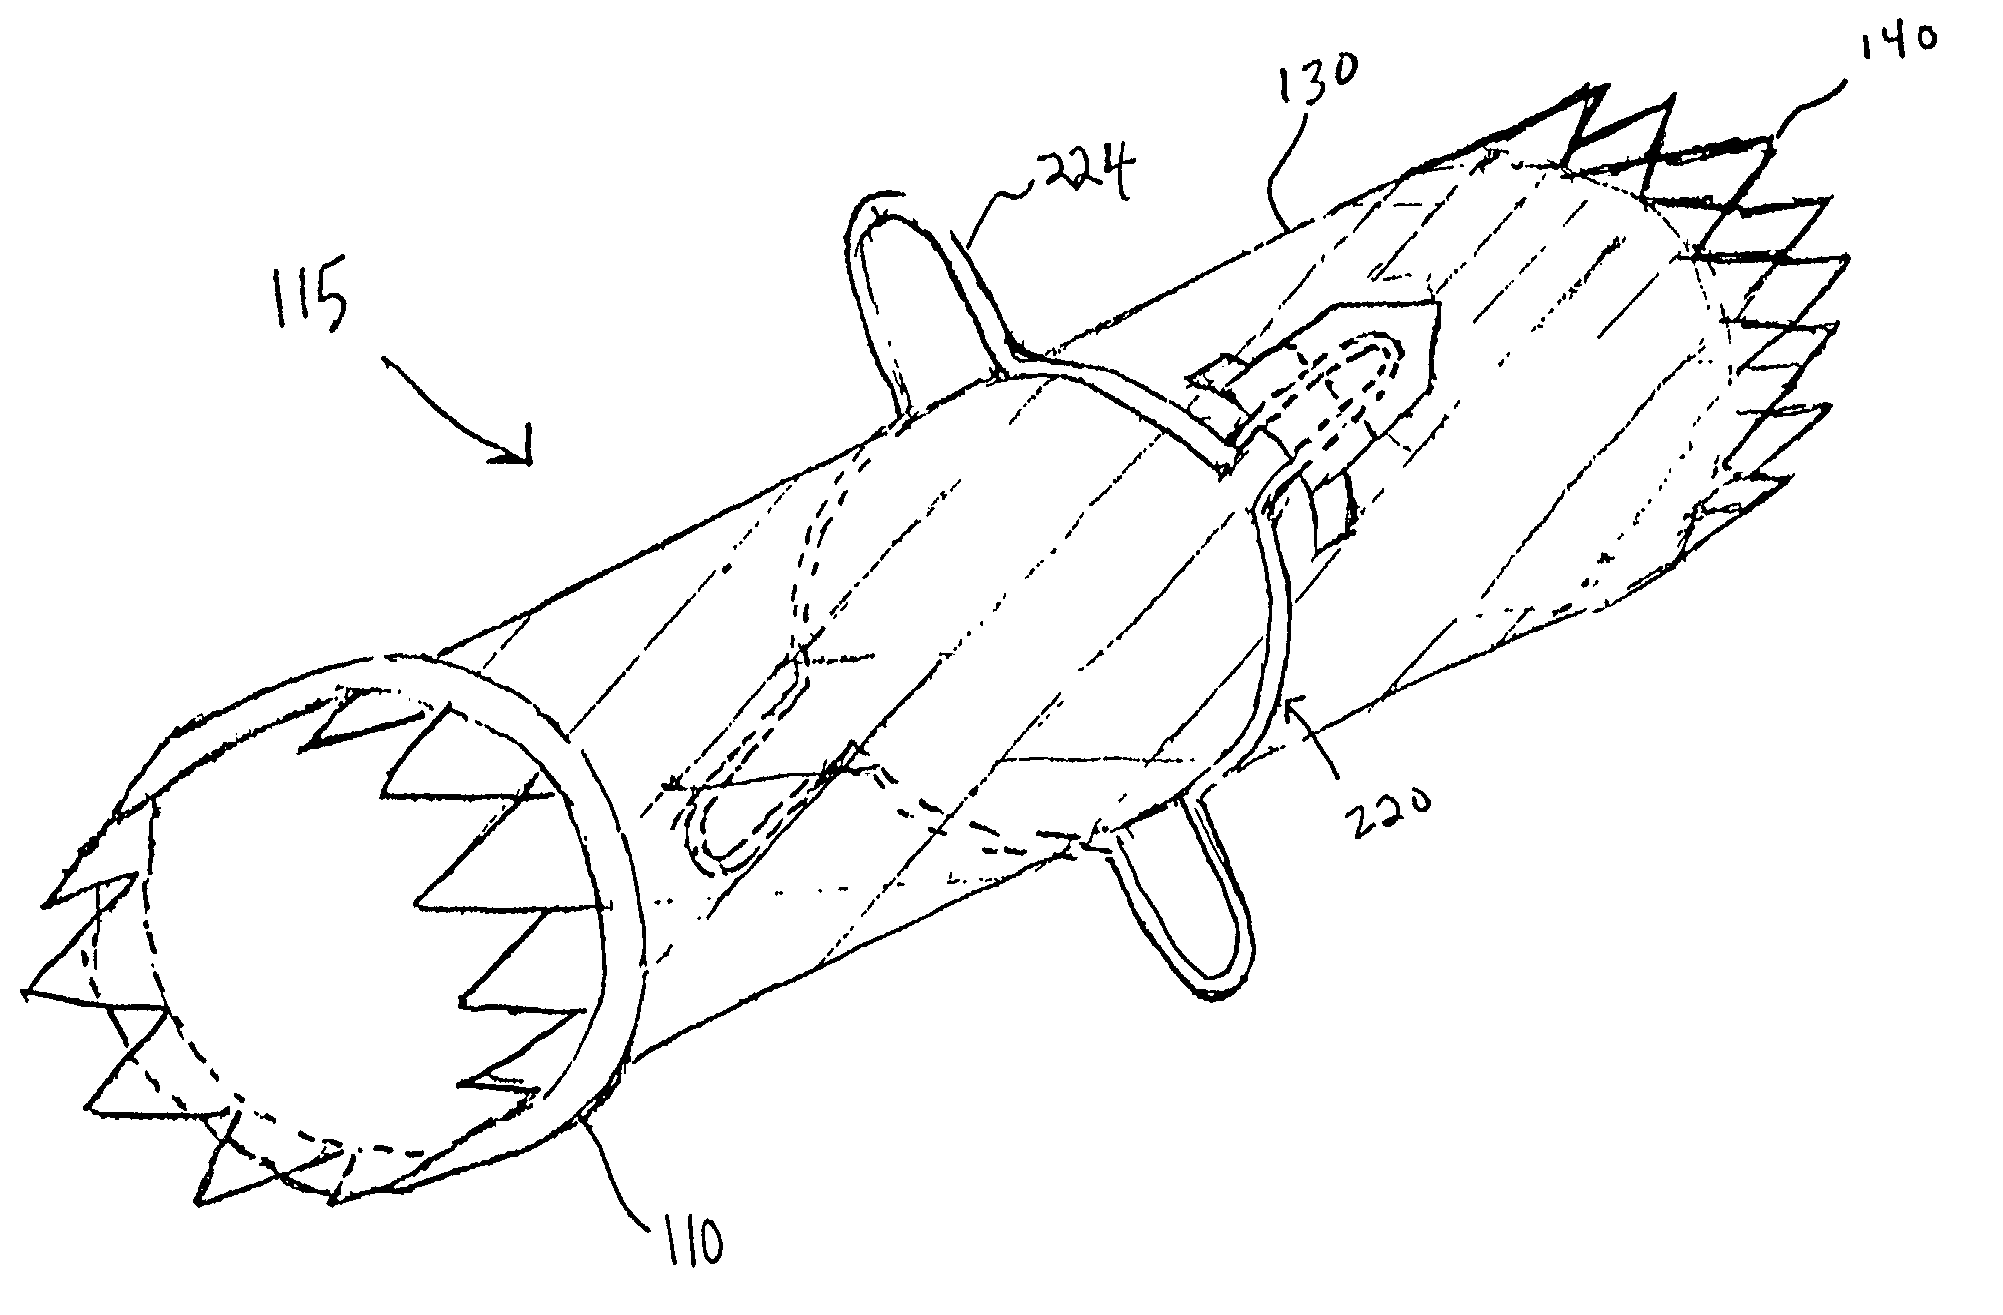 Implant having improved fixation to a body lumen and method for implanting the same